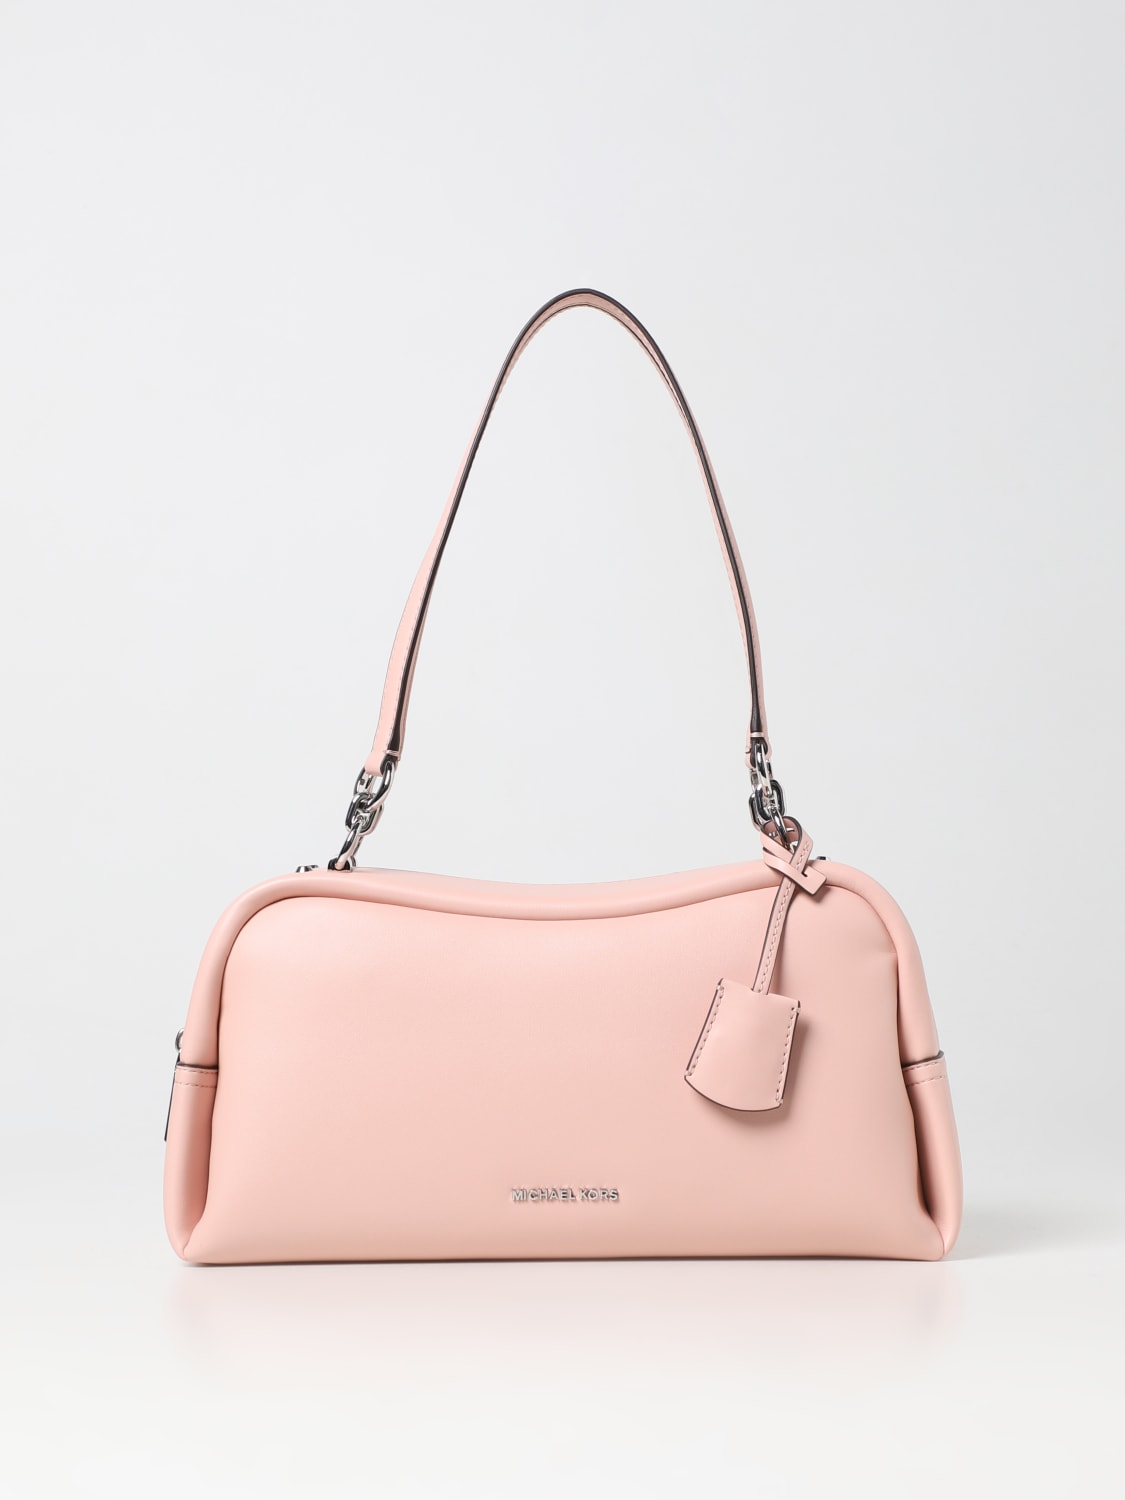 Michael Kors Outlet: Michael Cecily bag in synthetic nappa leather